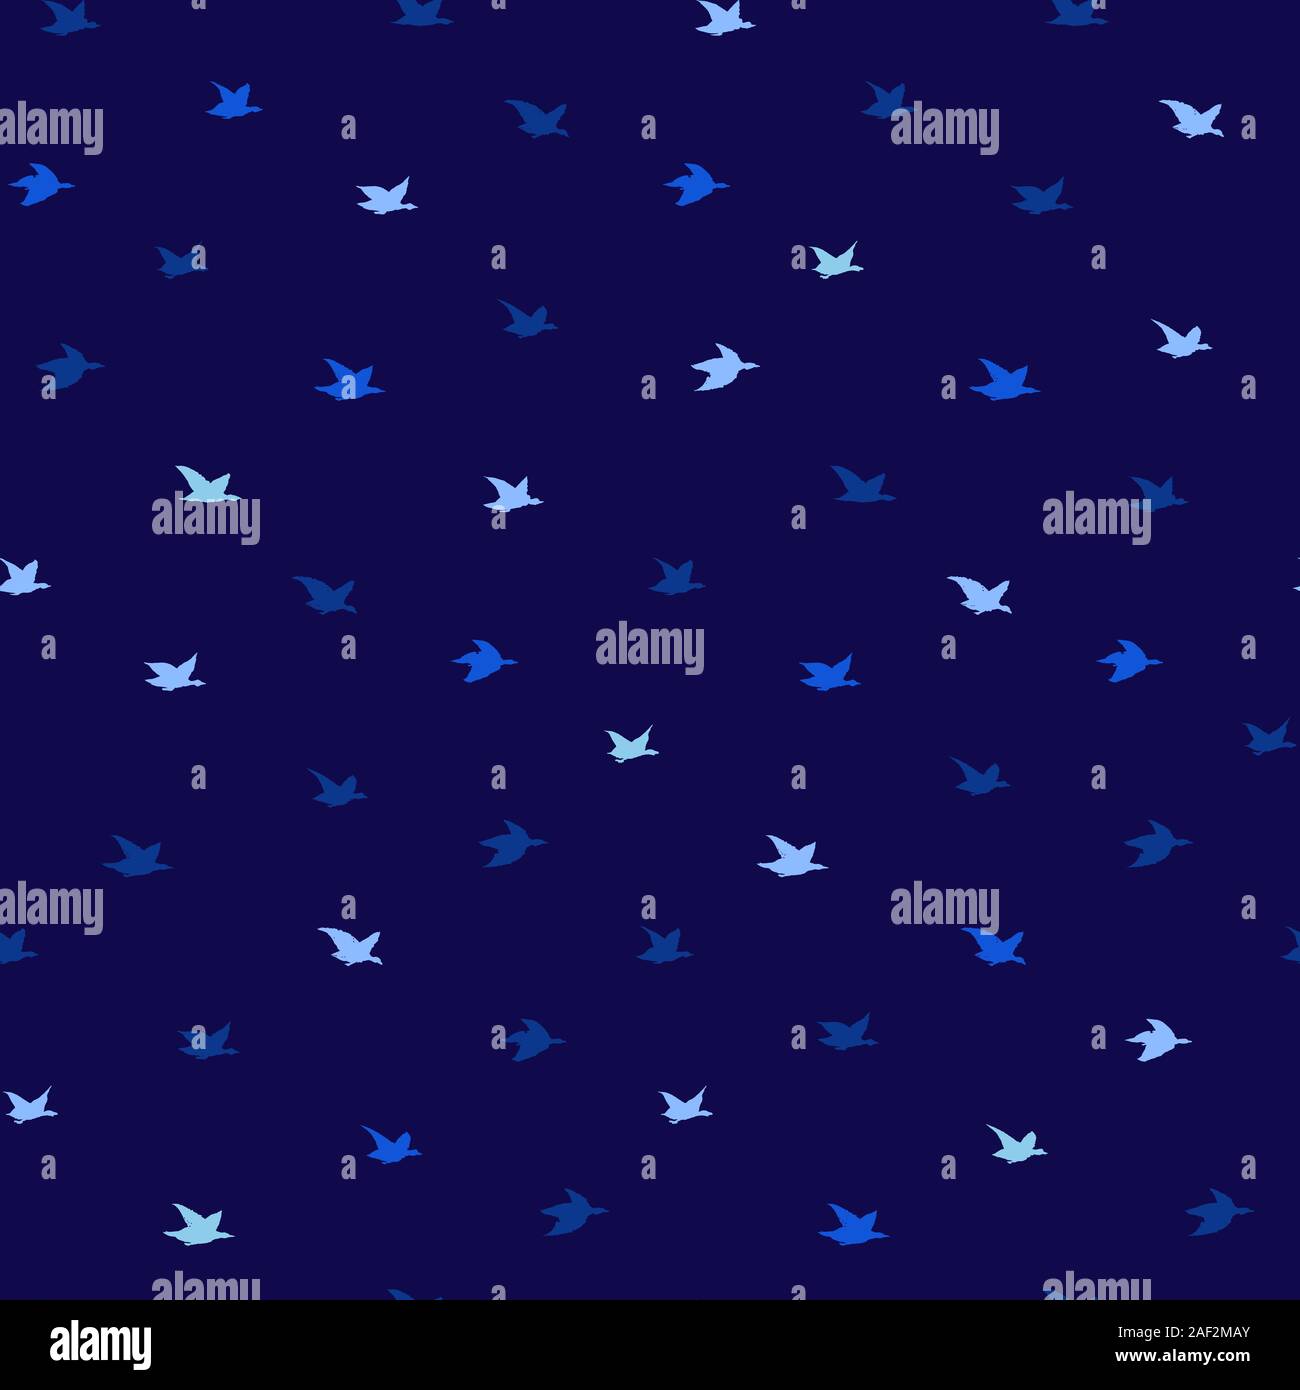 Blue wings 2020 Stock Vector Images - Alamy